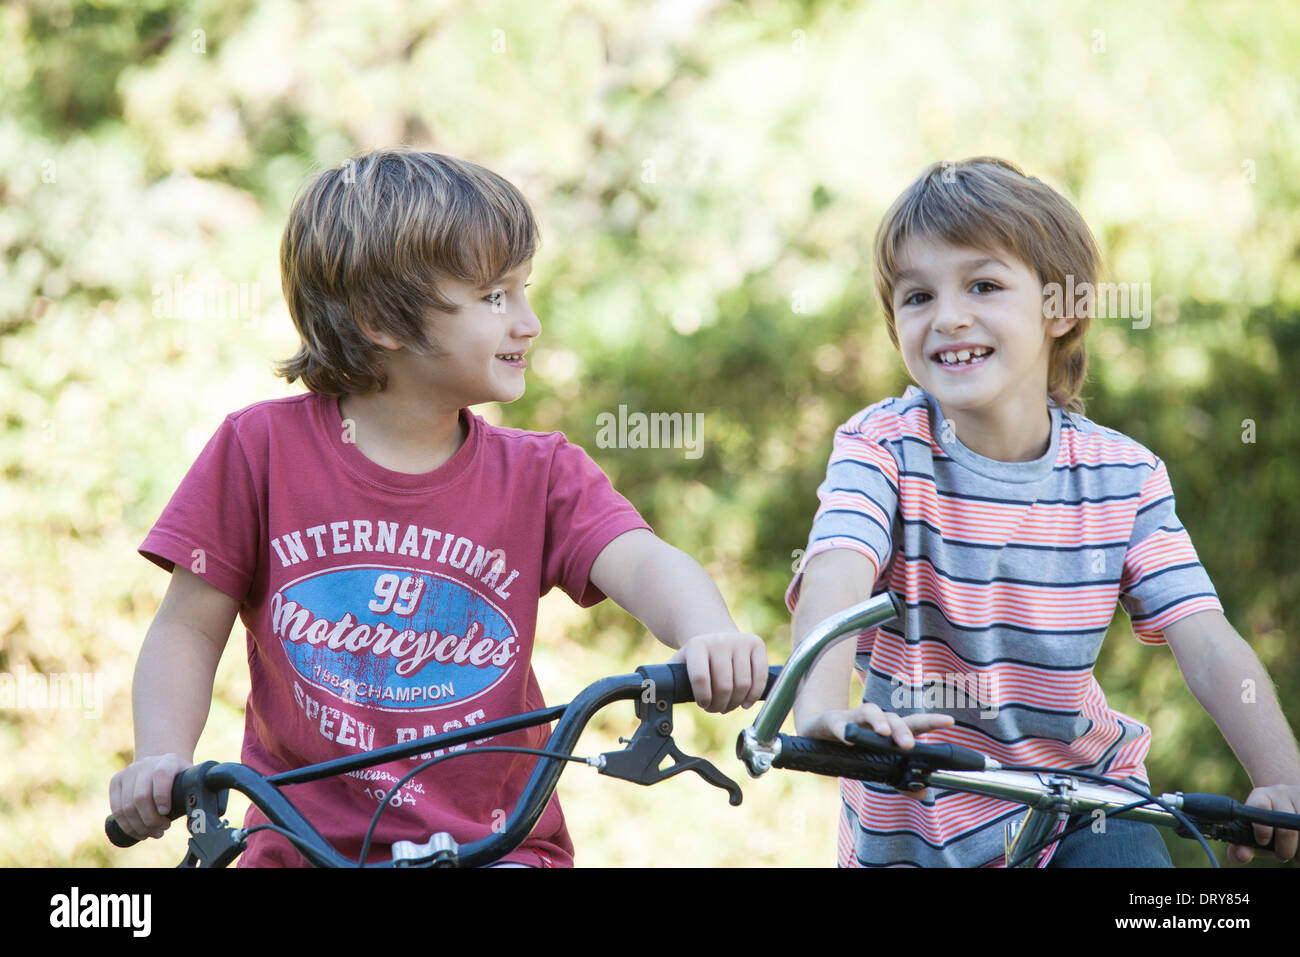 Boys riding bicycles side by side Stock Photo